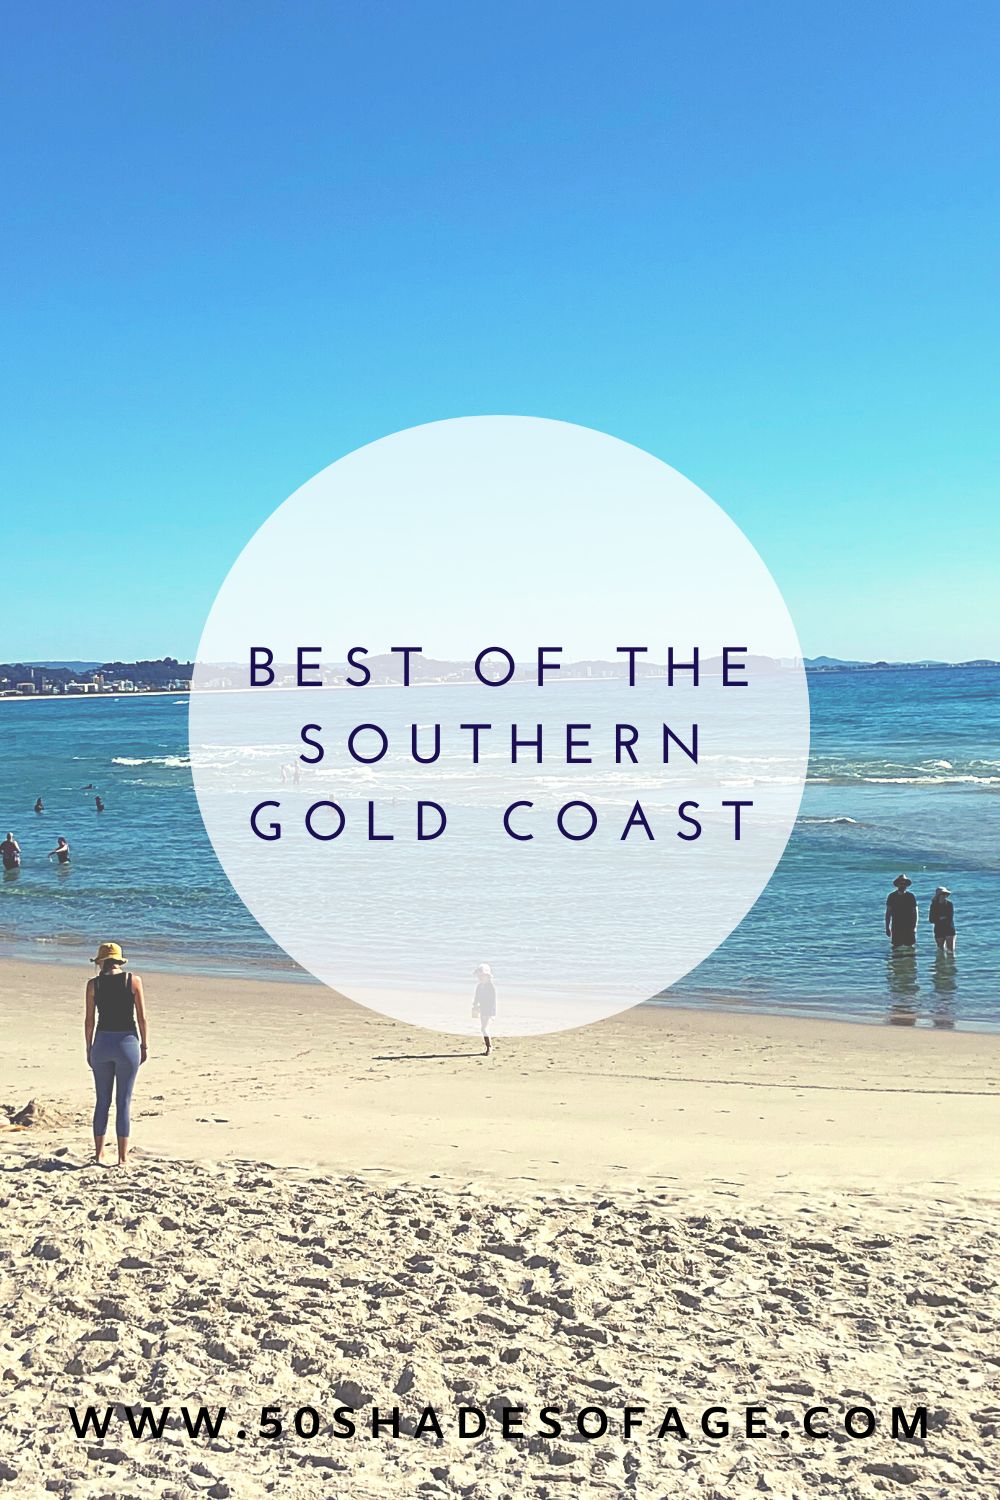 Best of the Southern Gold Coast